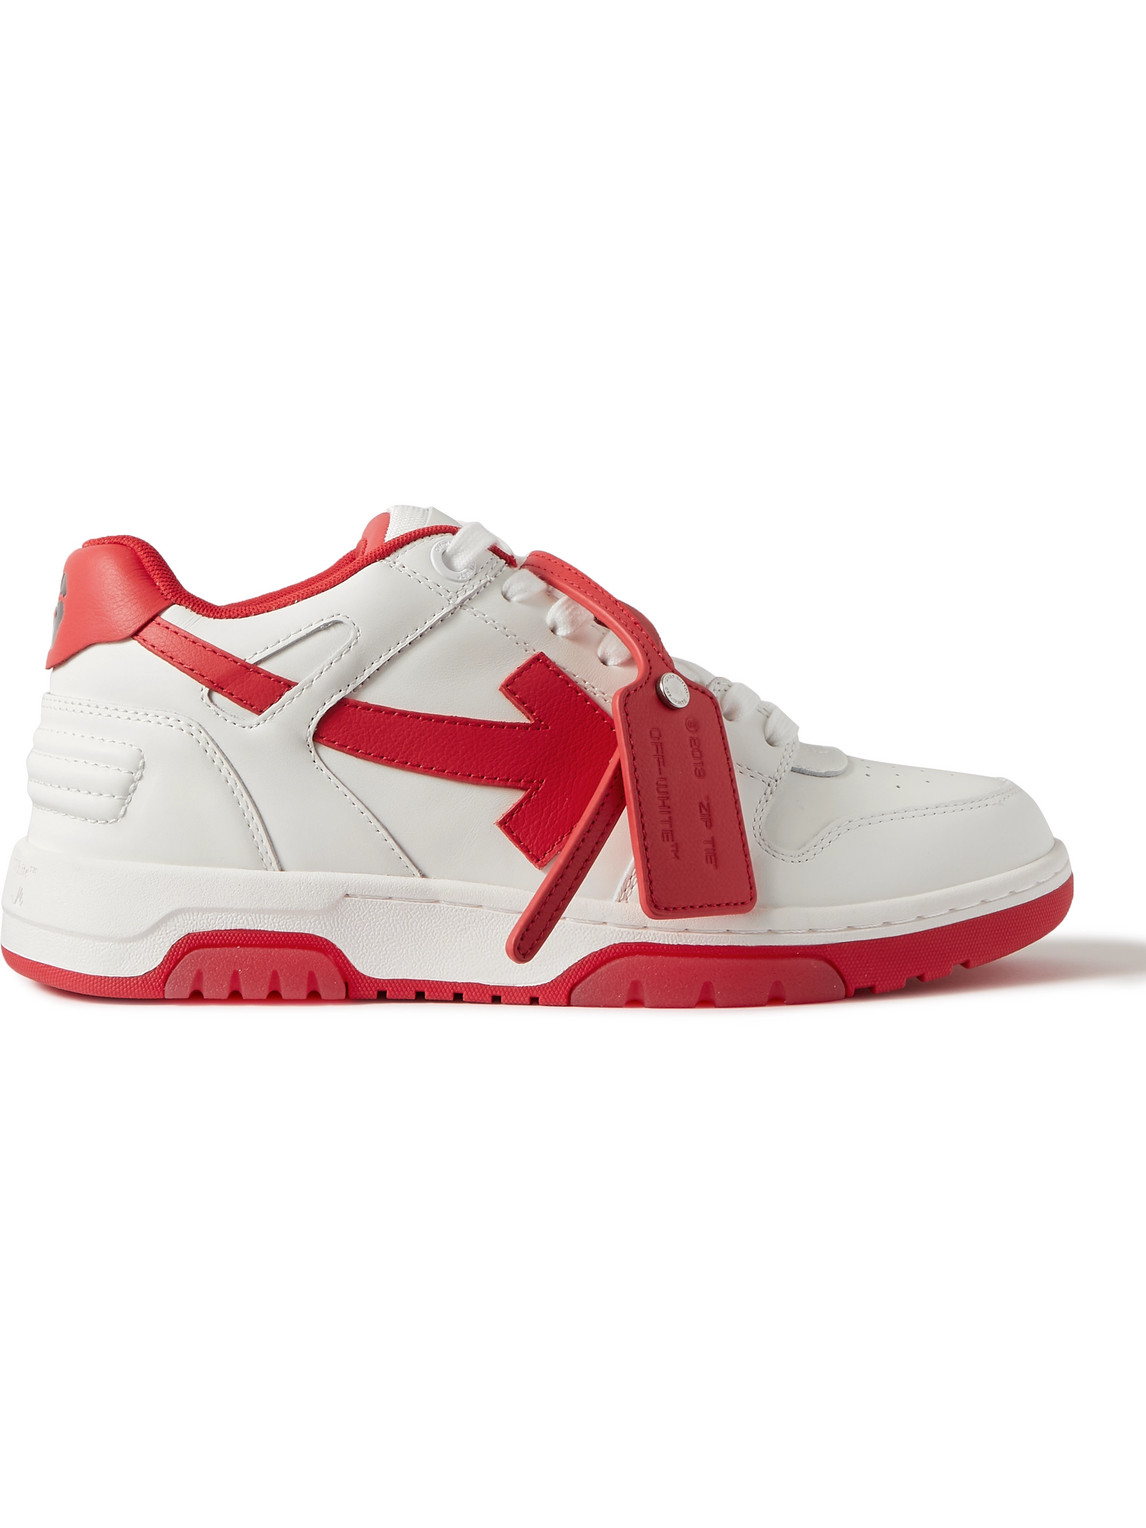 Off-White - Out of Office Leather Sneakers - Men - Red - EU 40 | The ...